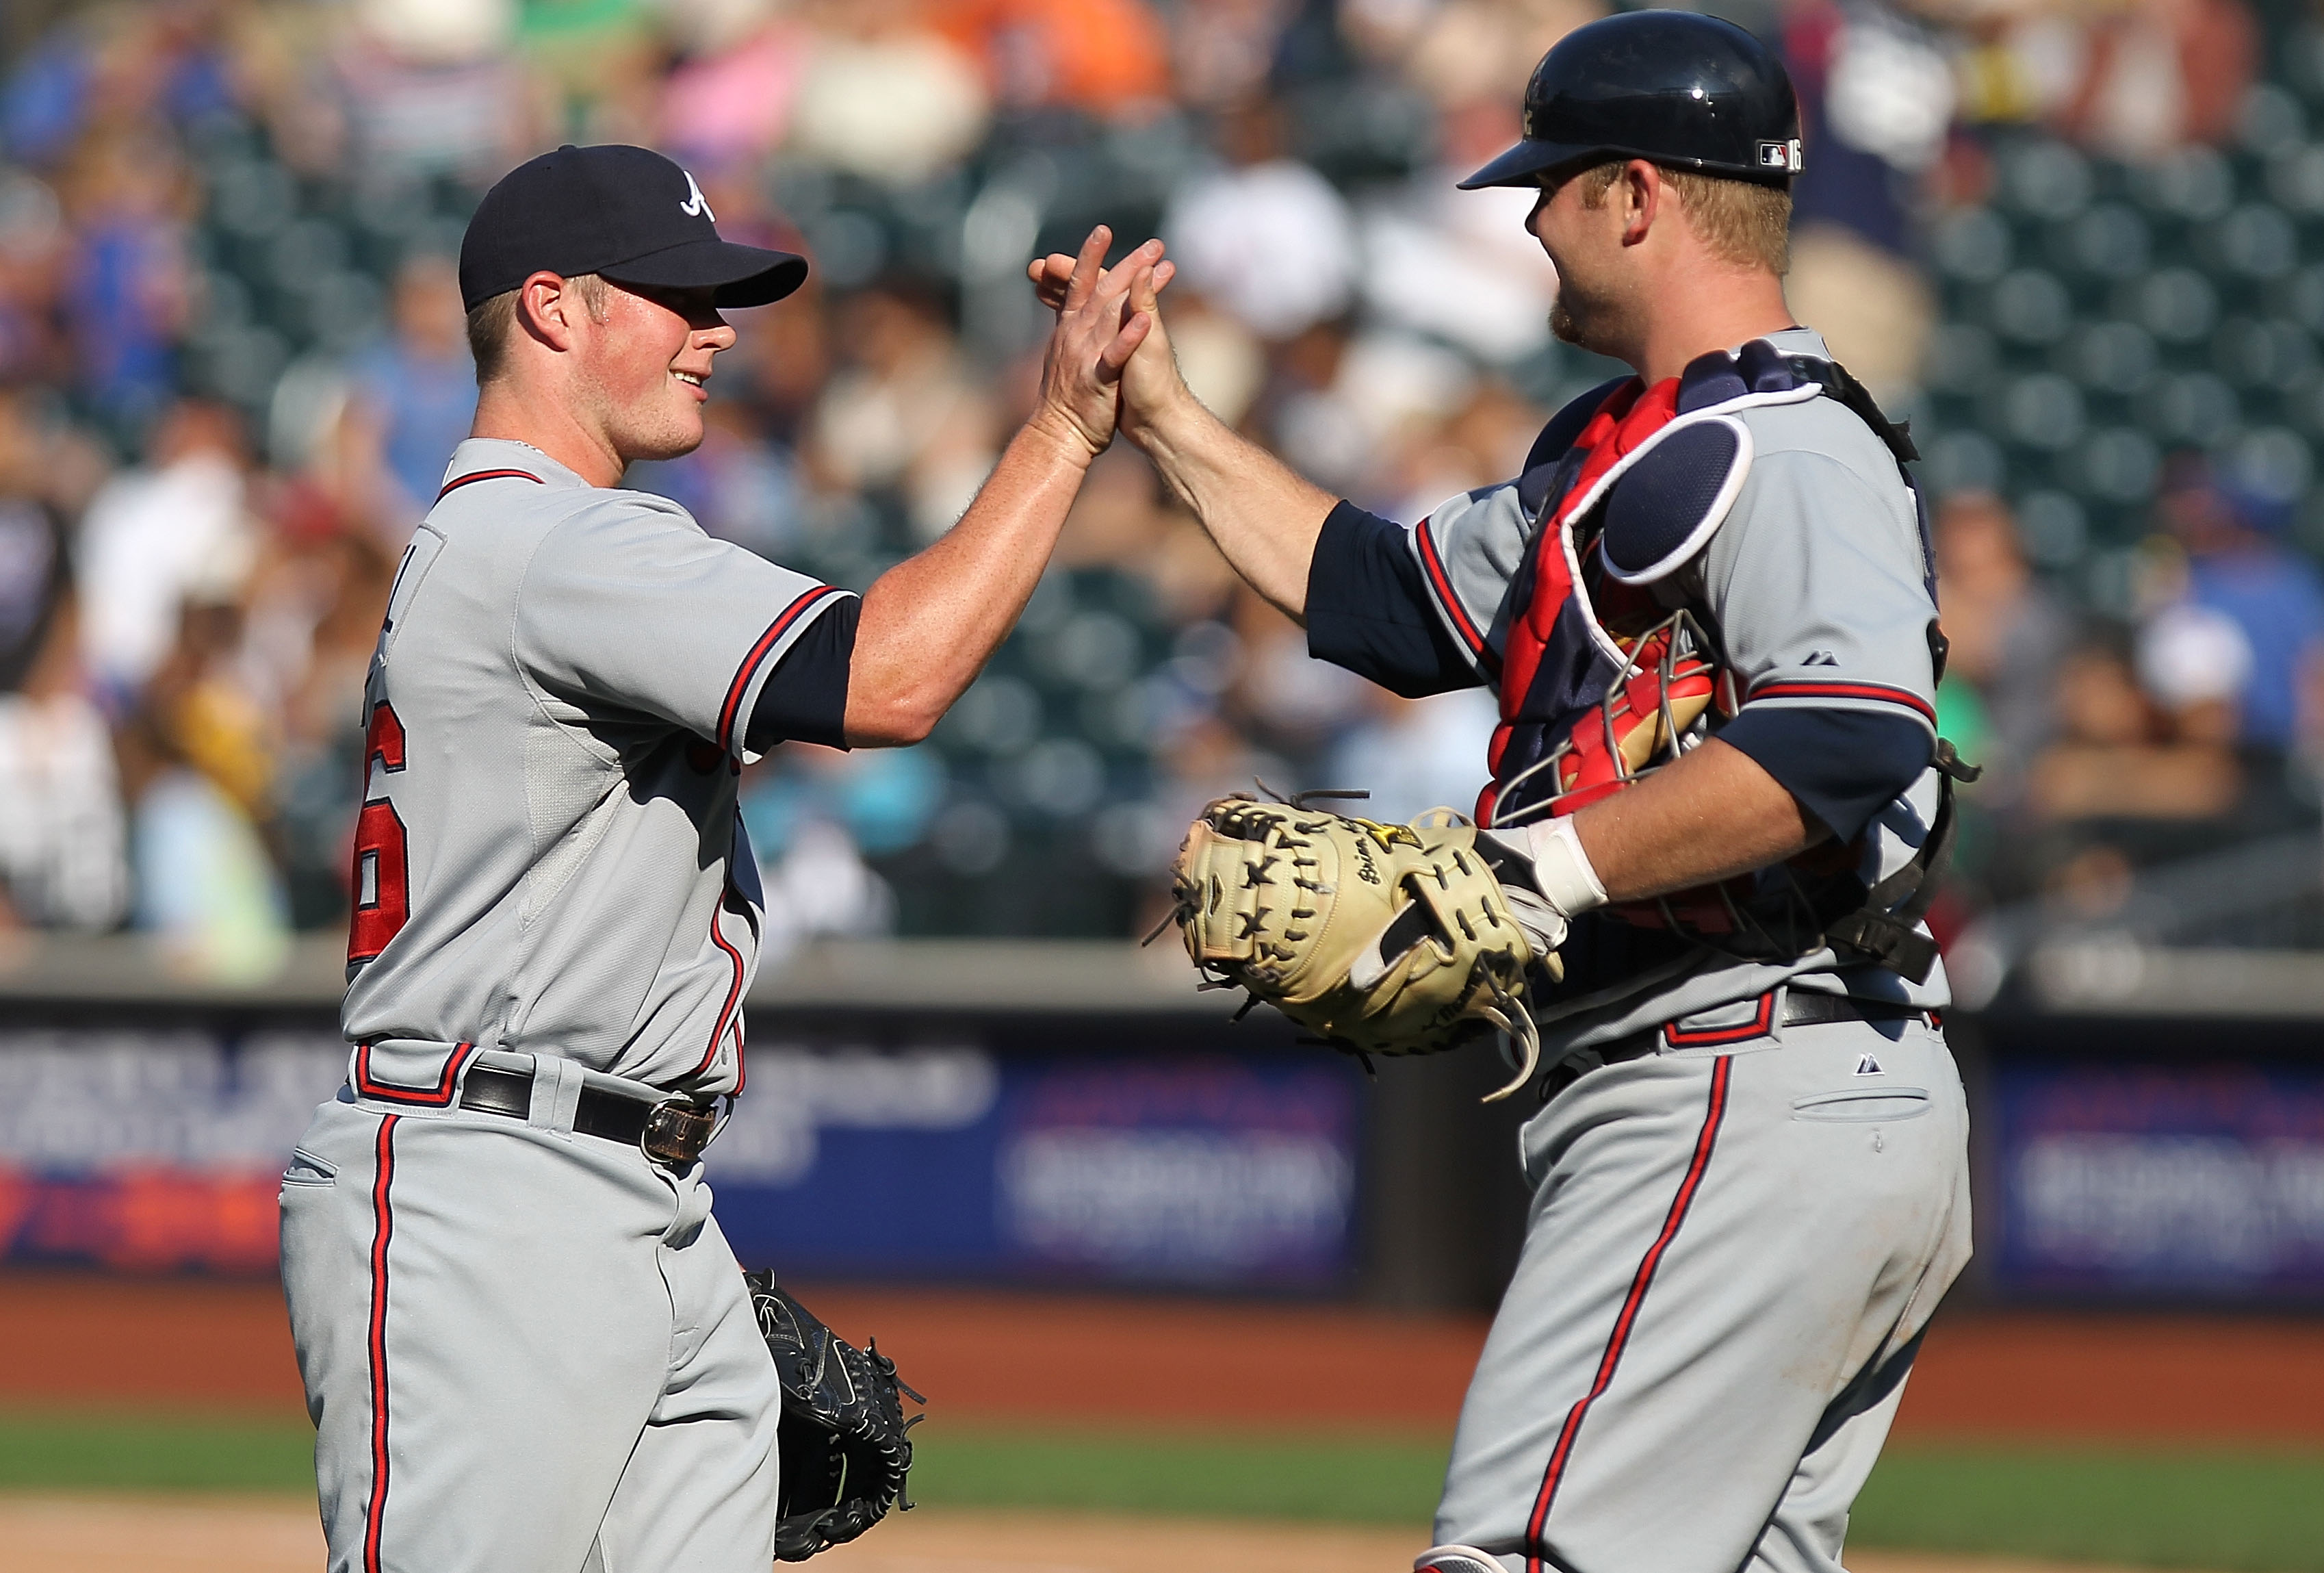 NEW YORK - SEPTEMBER 19: Craig Krimbel #46 of the Atlanta Braves celebrates the win with teammate Brian McCann #16 against the New York Mets at Citi Field on September 19, 2010 in the Flushing neighborhood of the Queens borough of New York City.  (Photo b